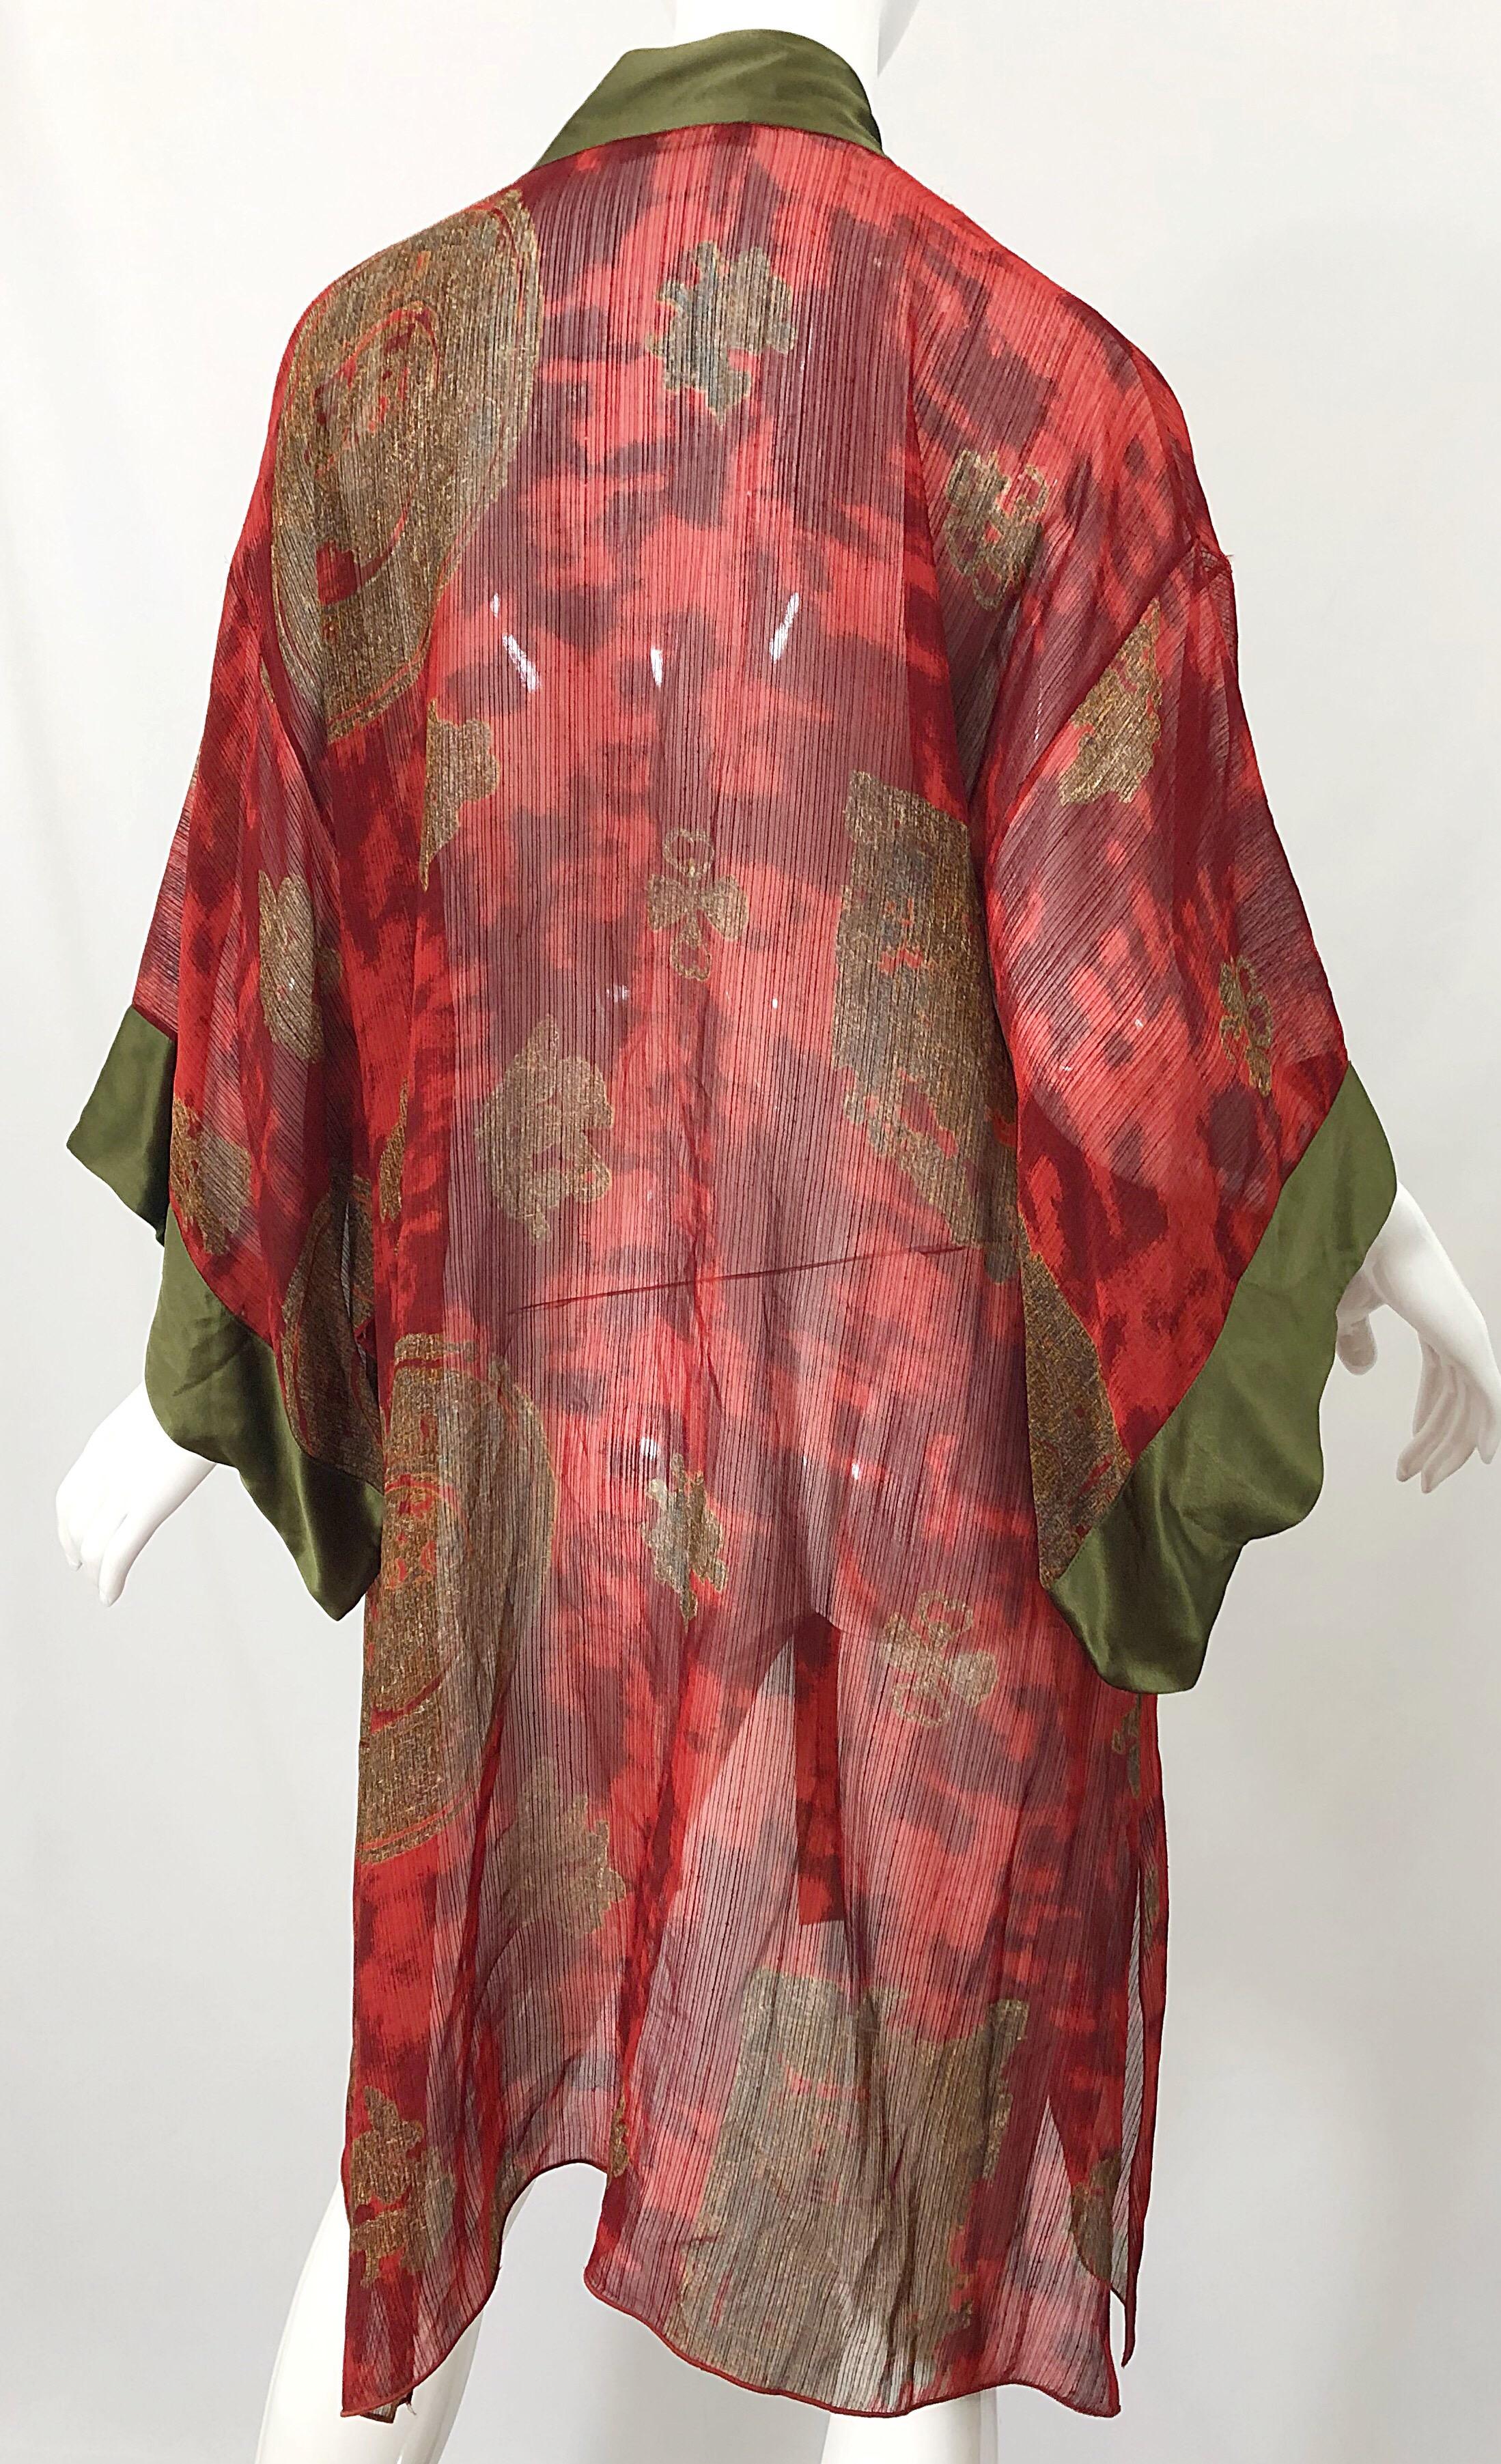 Vintage Holly's Harp Red Olive Green Gold Silk Chiffon Sheer Kimono Jacket For Sale 6